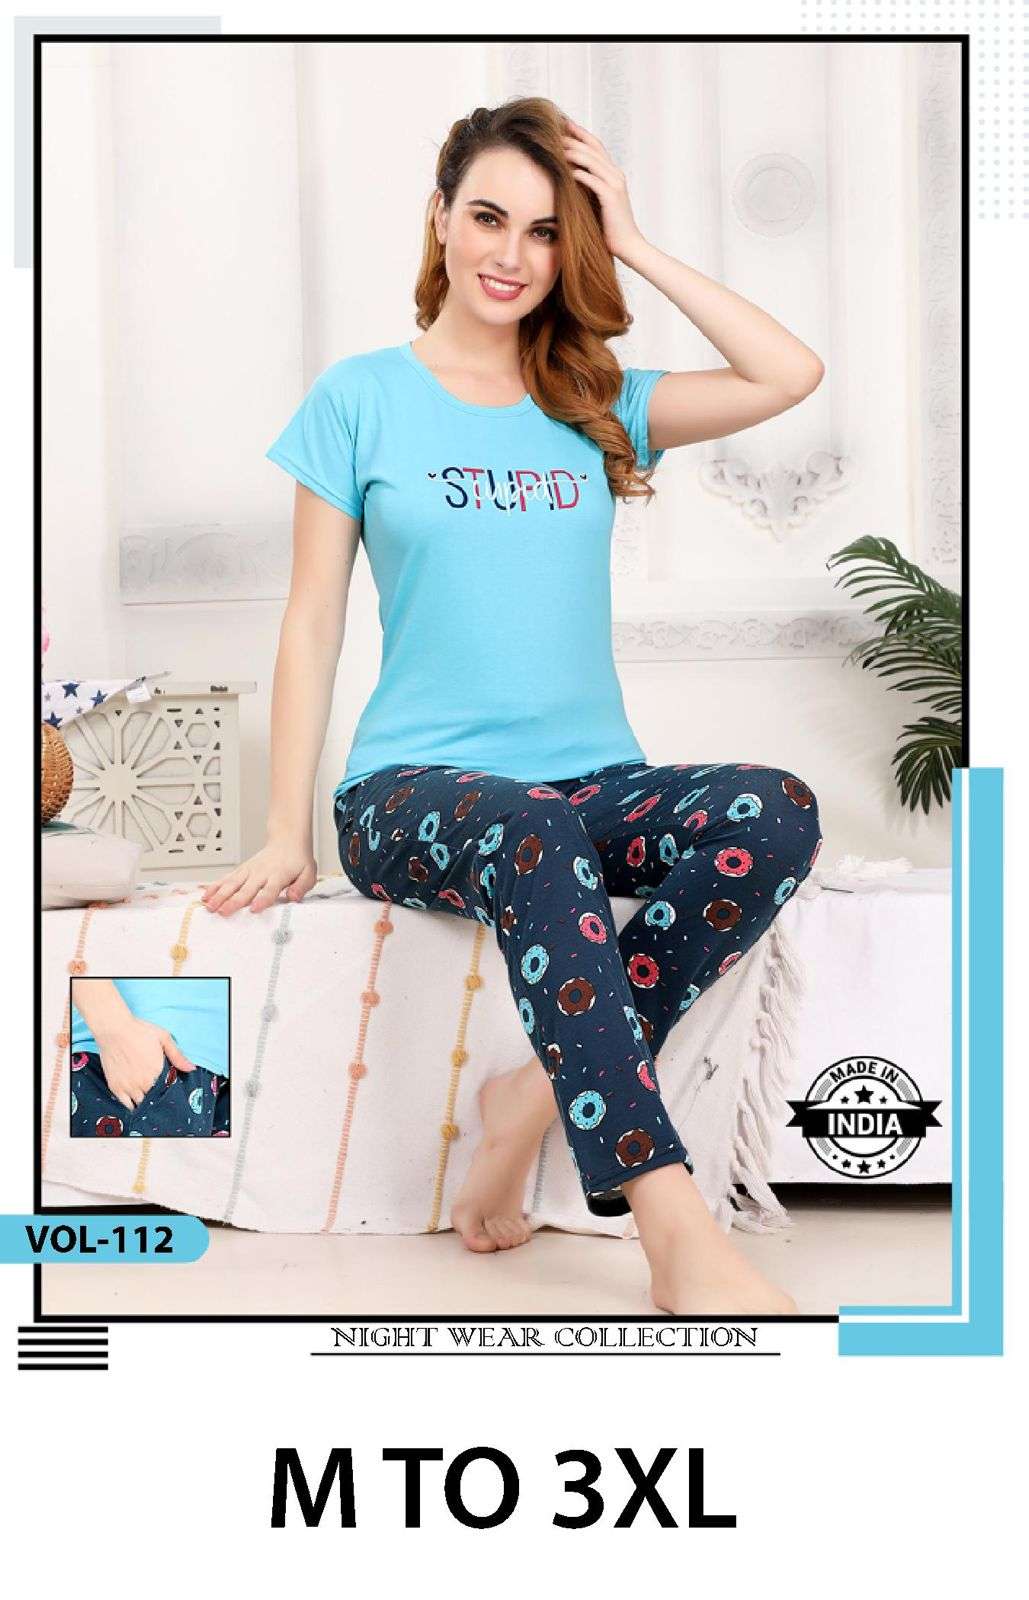 SUMMER SPECIAL VOL.DN112 Heavy Shinker Hosiery Cotton Plain & Print Night Suits With Pockets CATALOG WHOLESALER BEST RATE